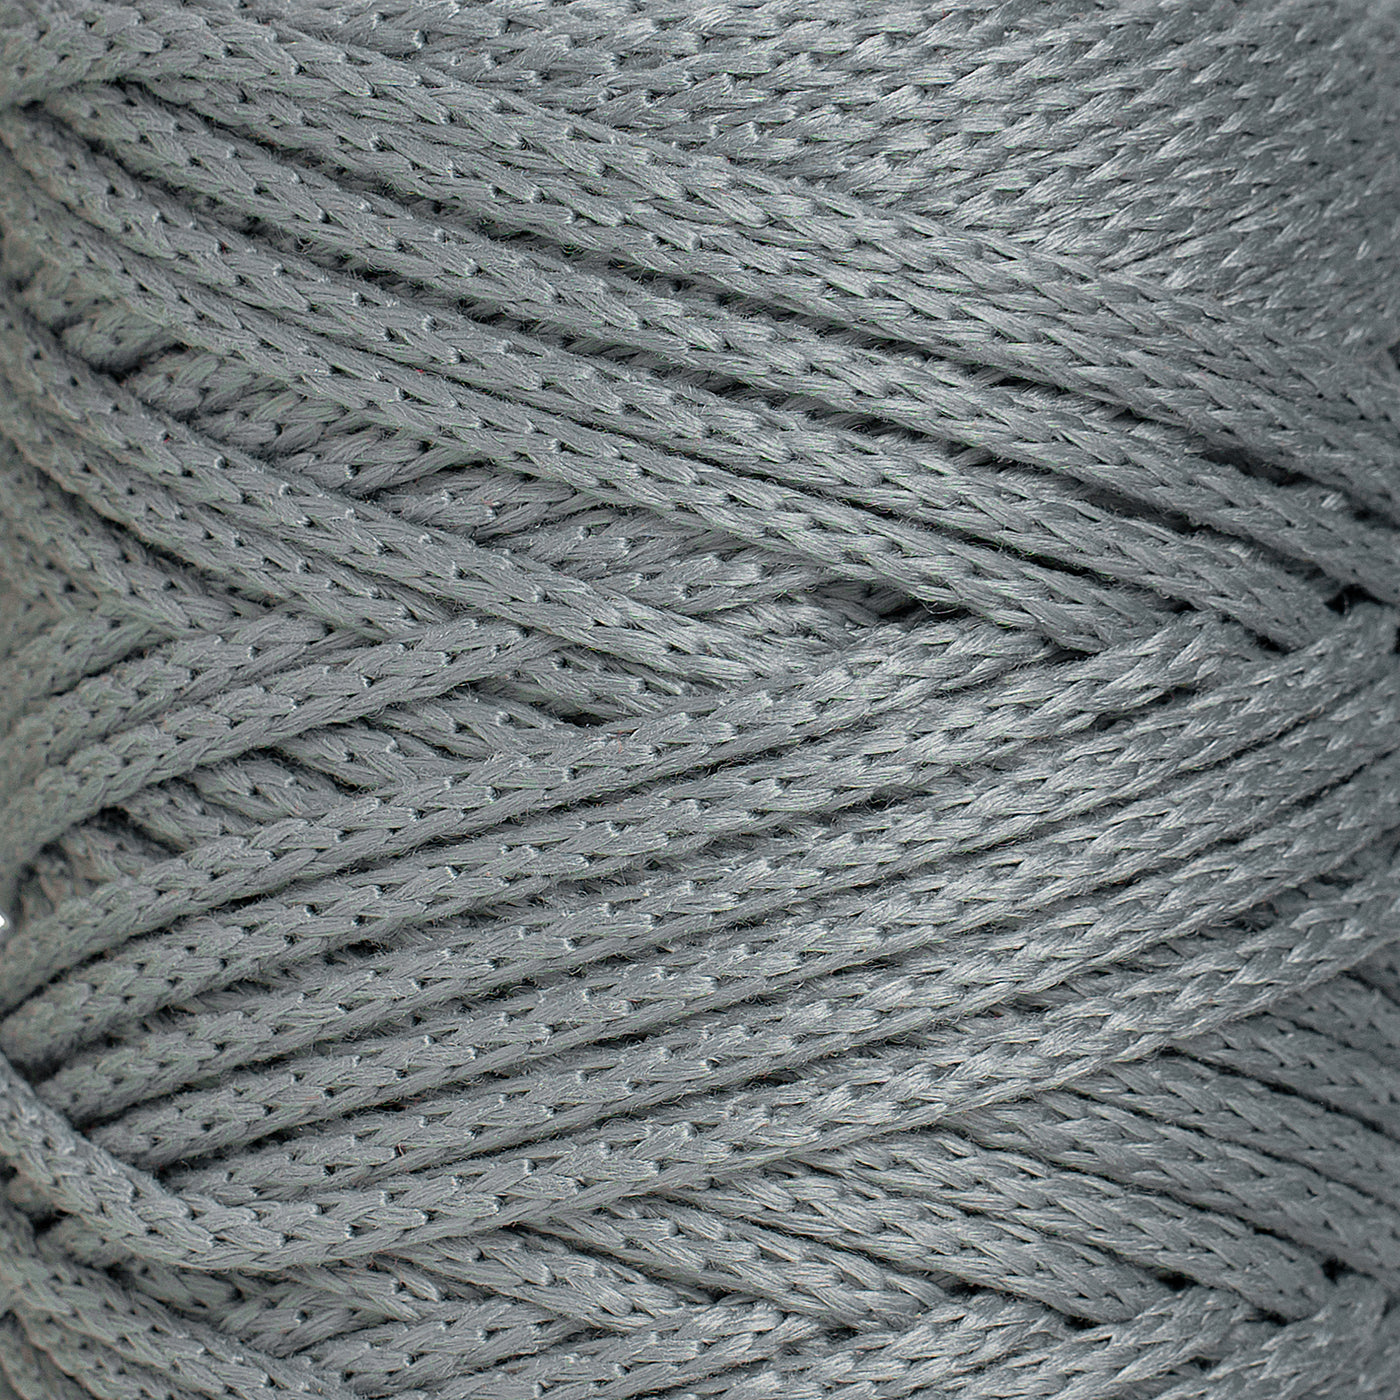 OUTDOOR RECYCLED BRAIDED CORD 6 MM -  SOFT GRAY COLOR